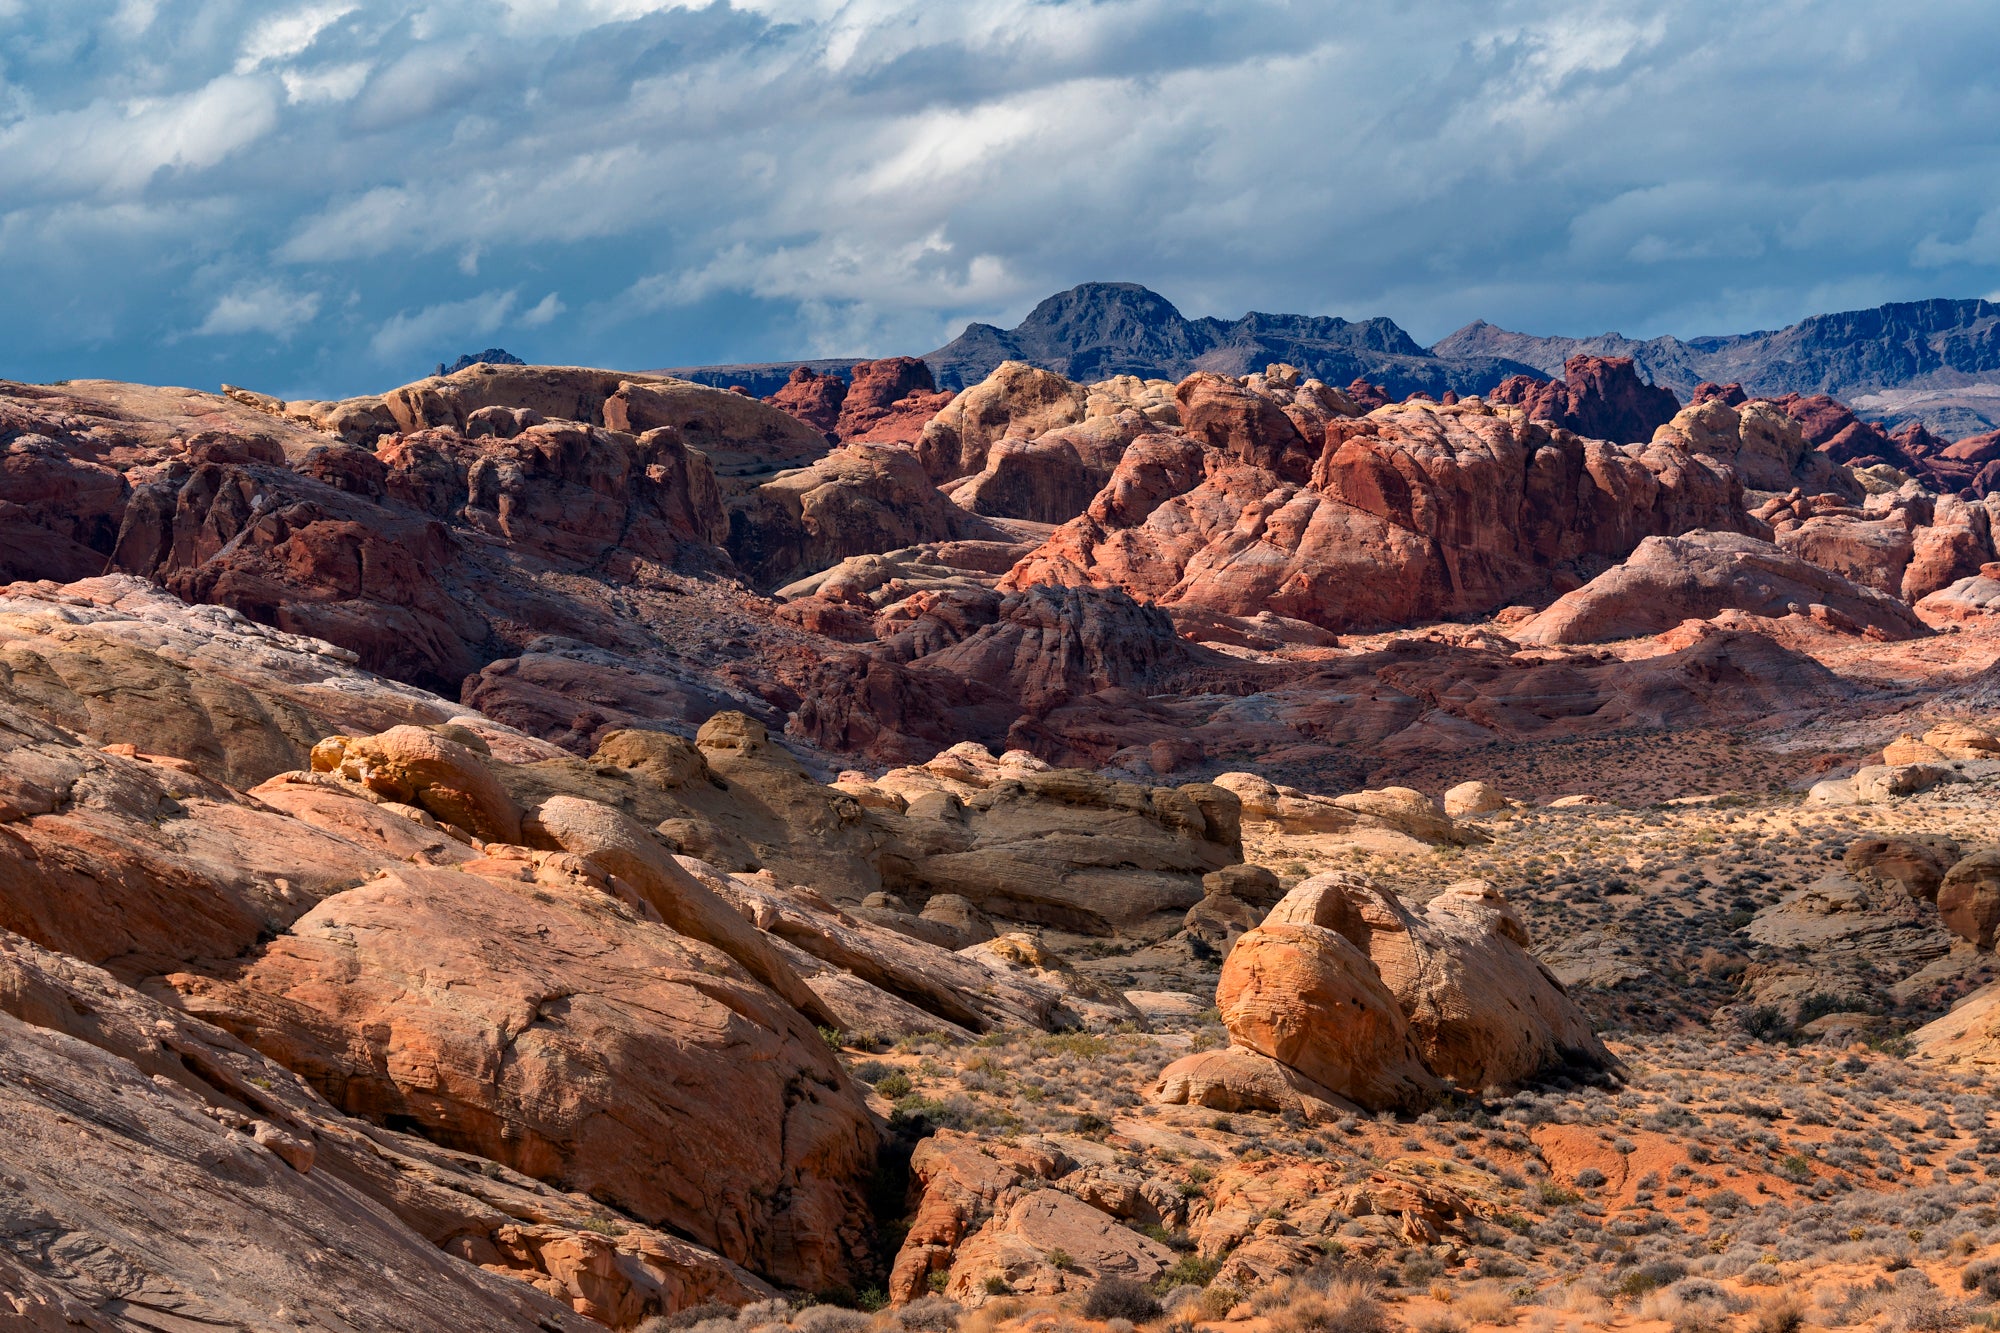 "Unforgettable" Valley of Fire, NV